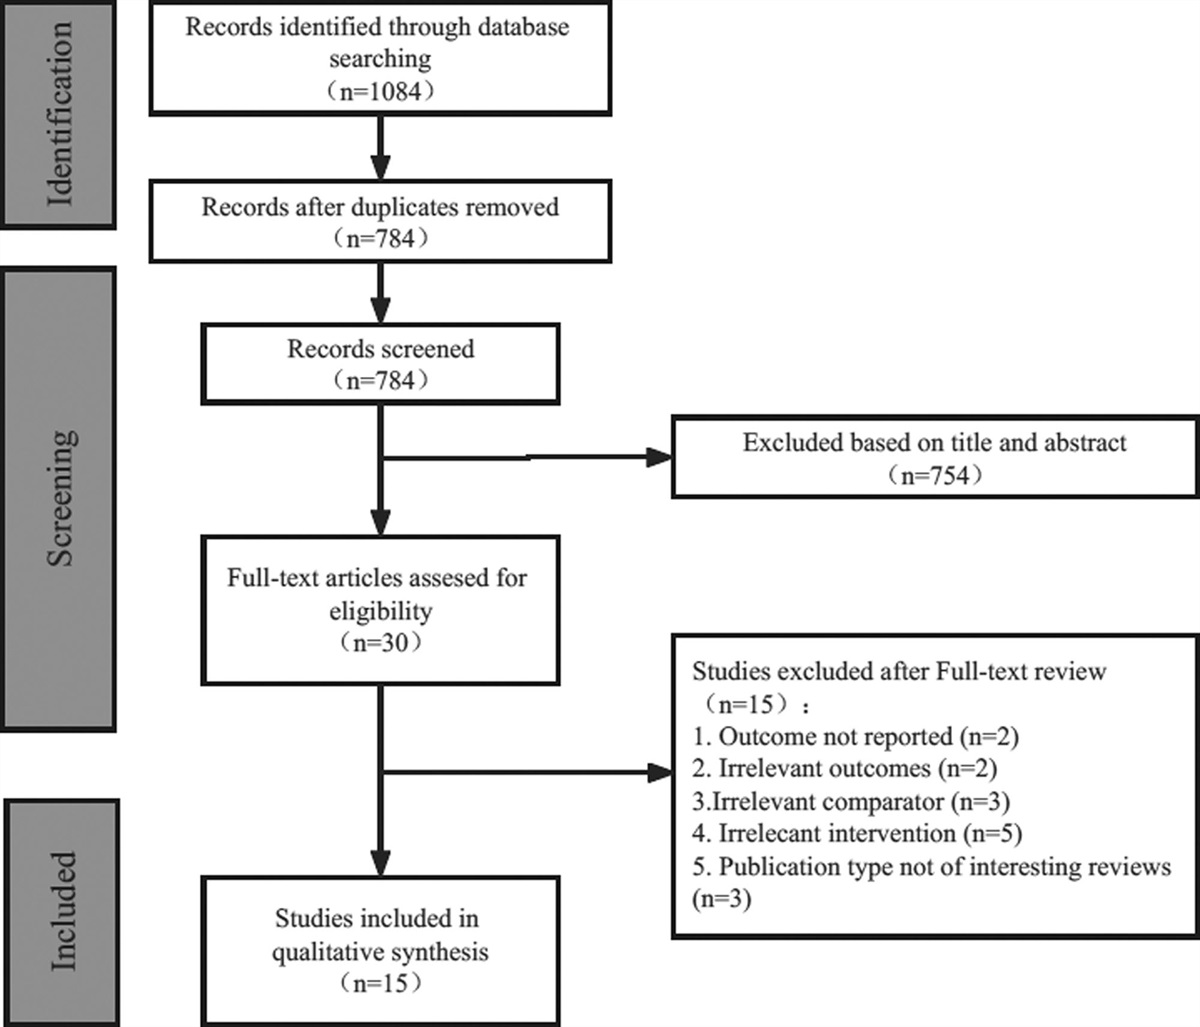 Efficacy and safety comparison between Lenvatinib and Sorafenib in hepatocellular carcinoma treatment: a systematic review and meta-analysis of real-world study